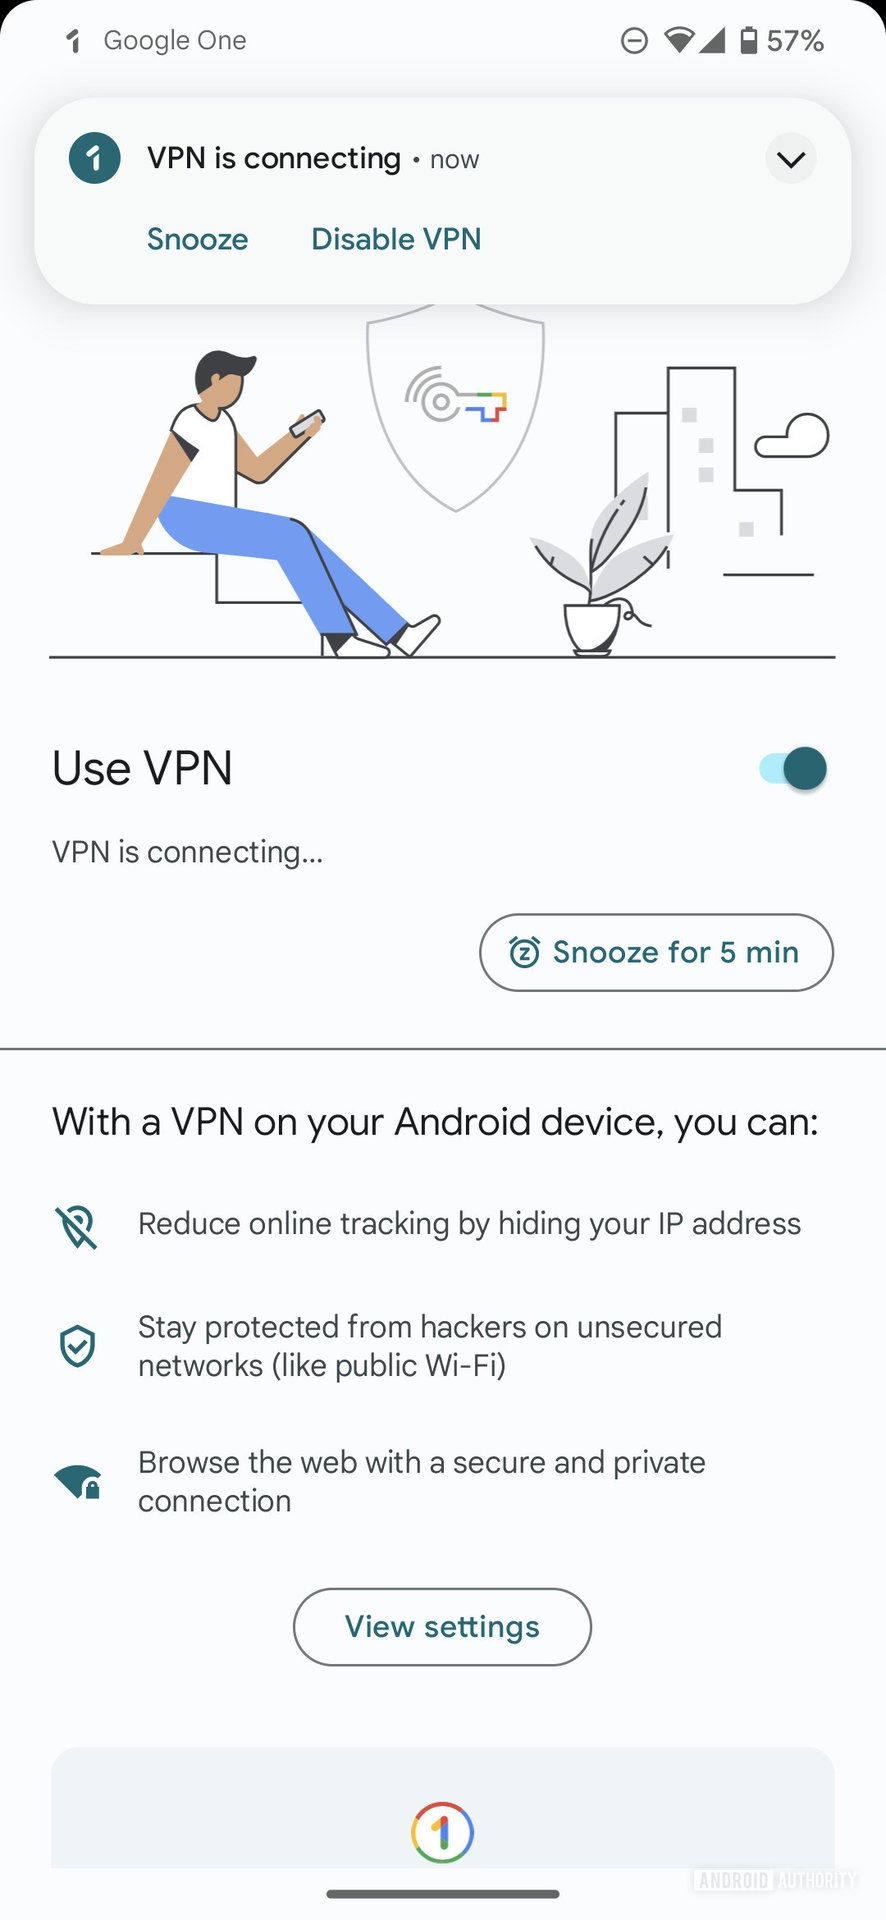 A screenshot of the Google One VPN interface showing the option to enable the VPN.